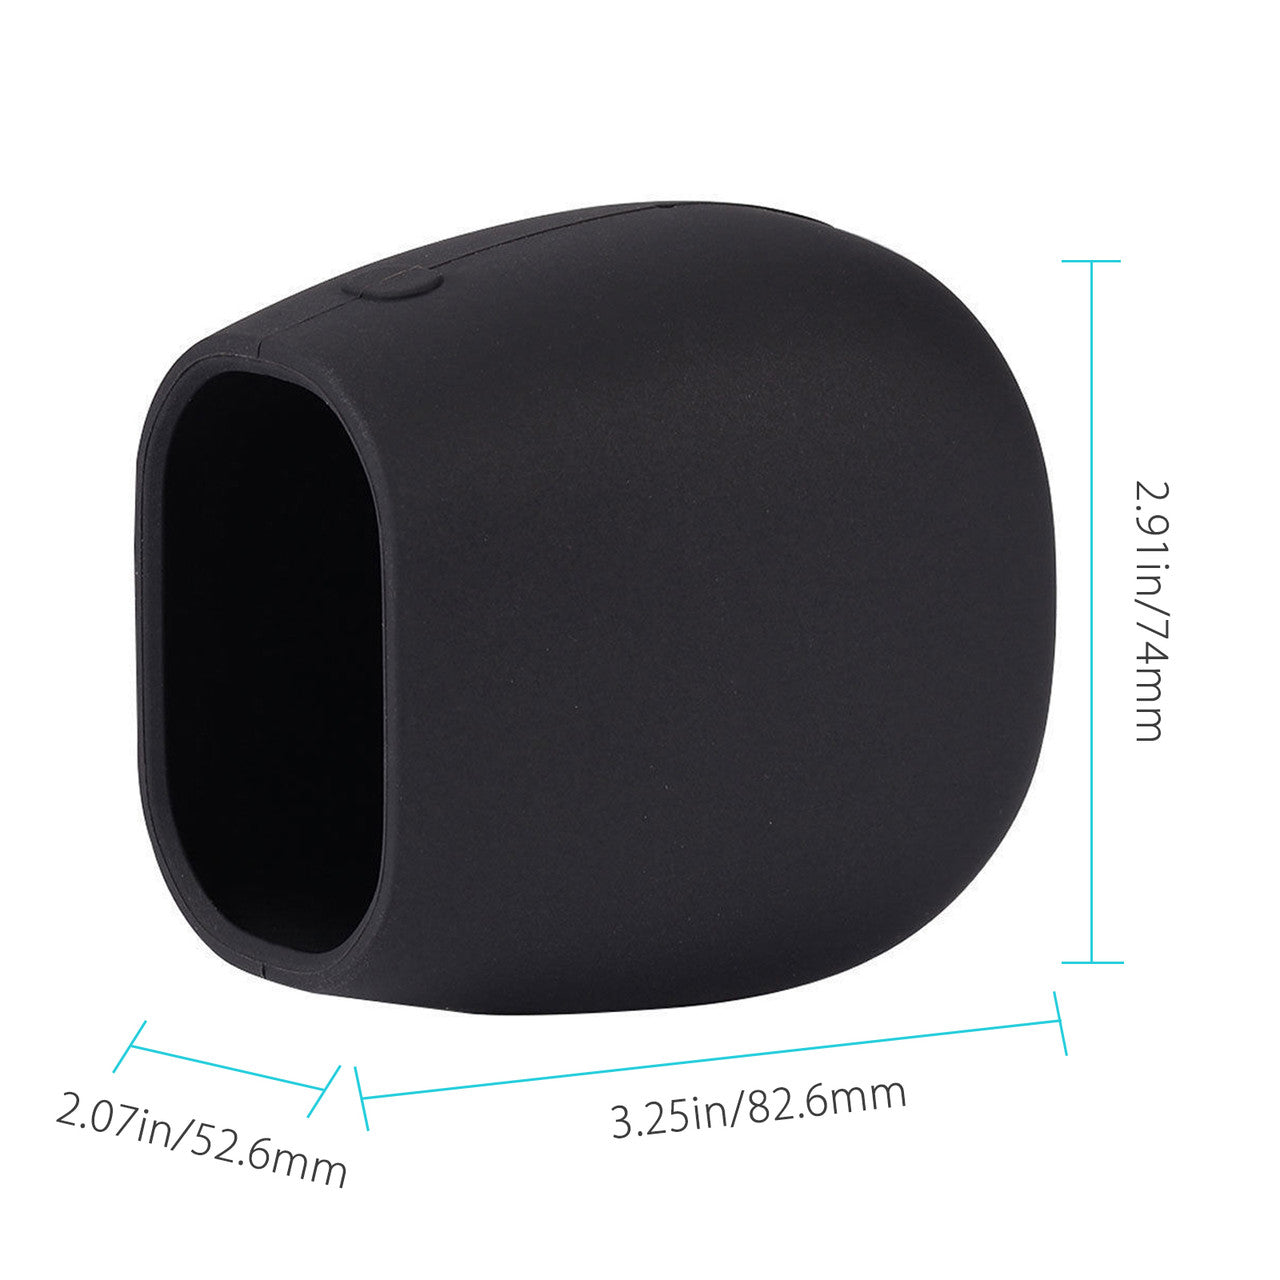 Outdoor/Indoor Silicone Skin Protector Case Cover for Arlo Pro Security Camera